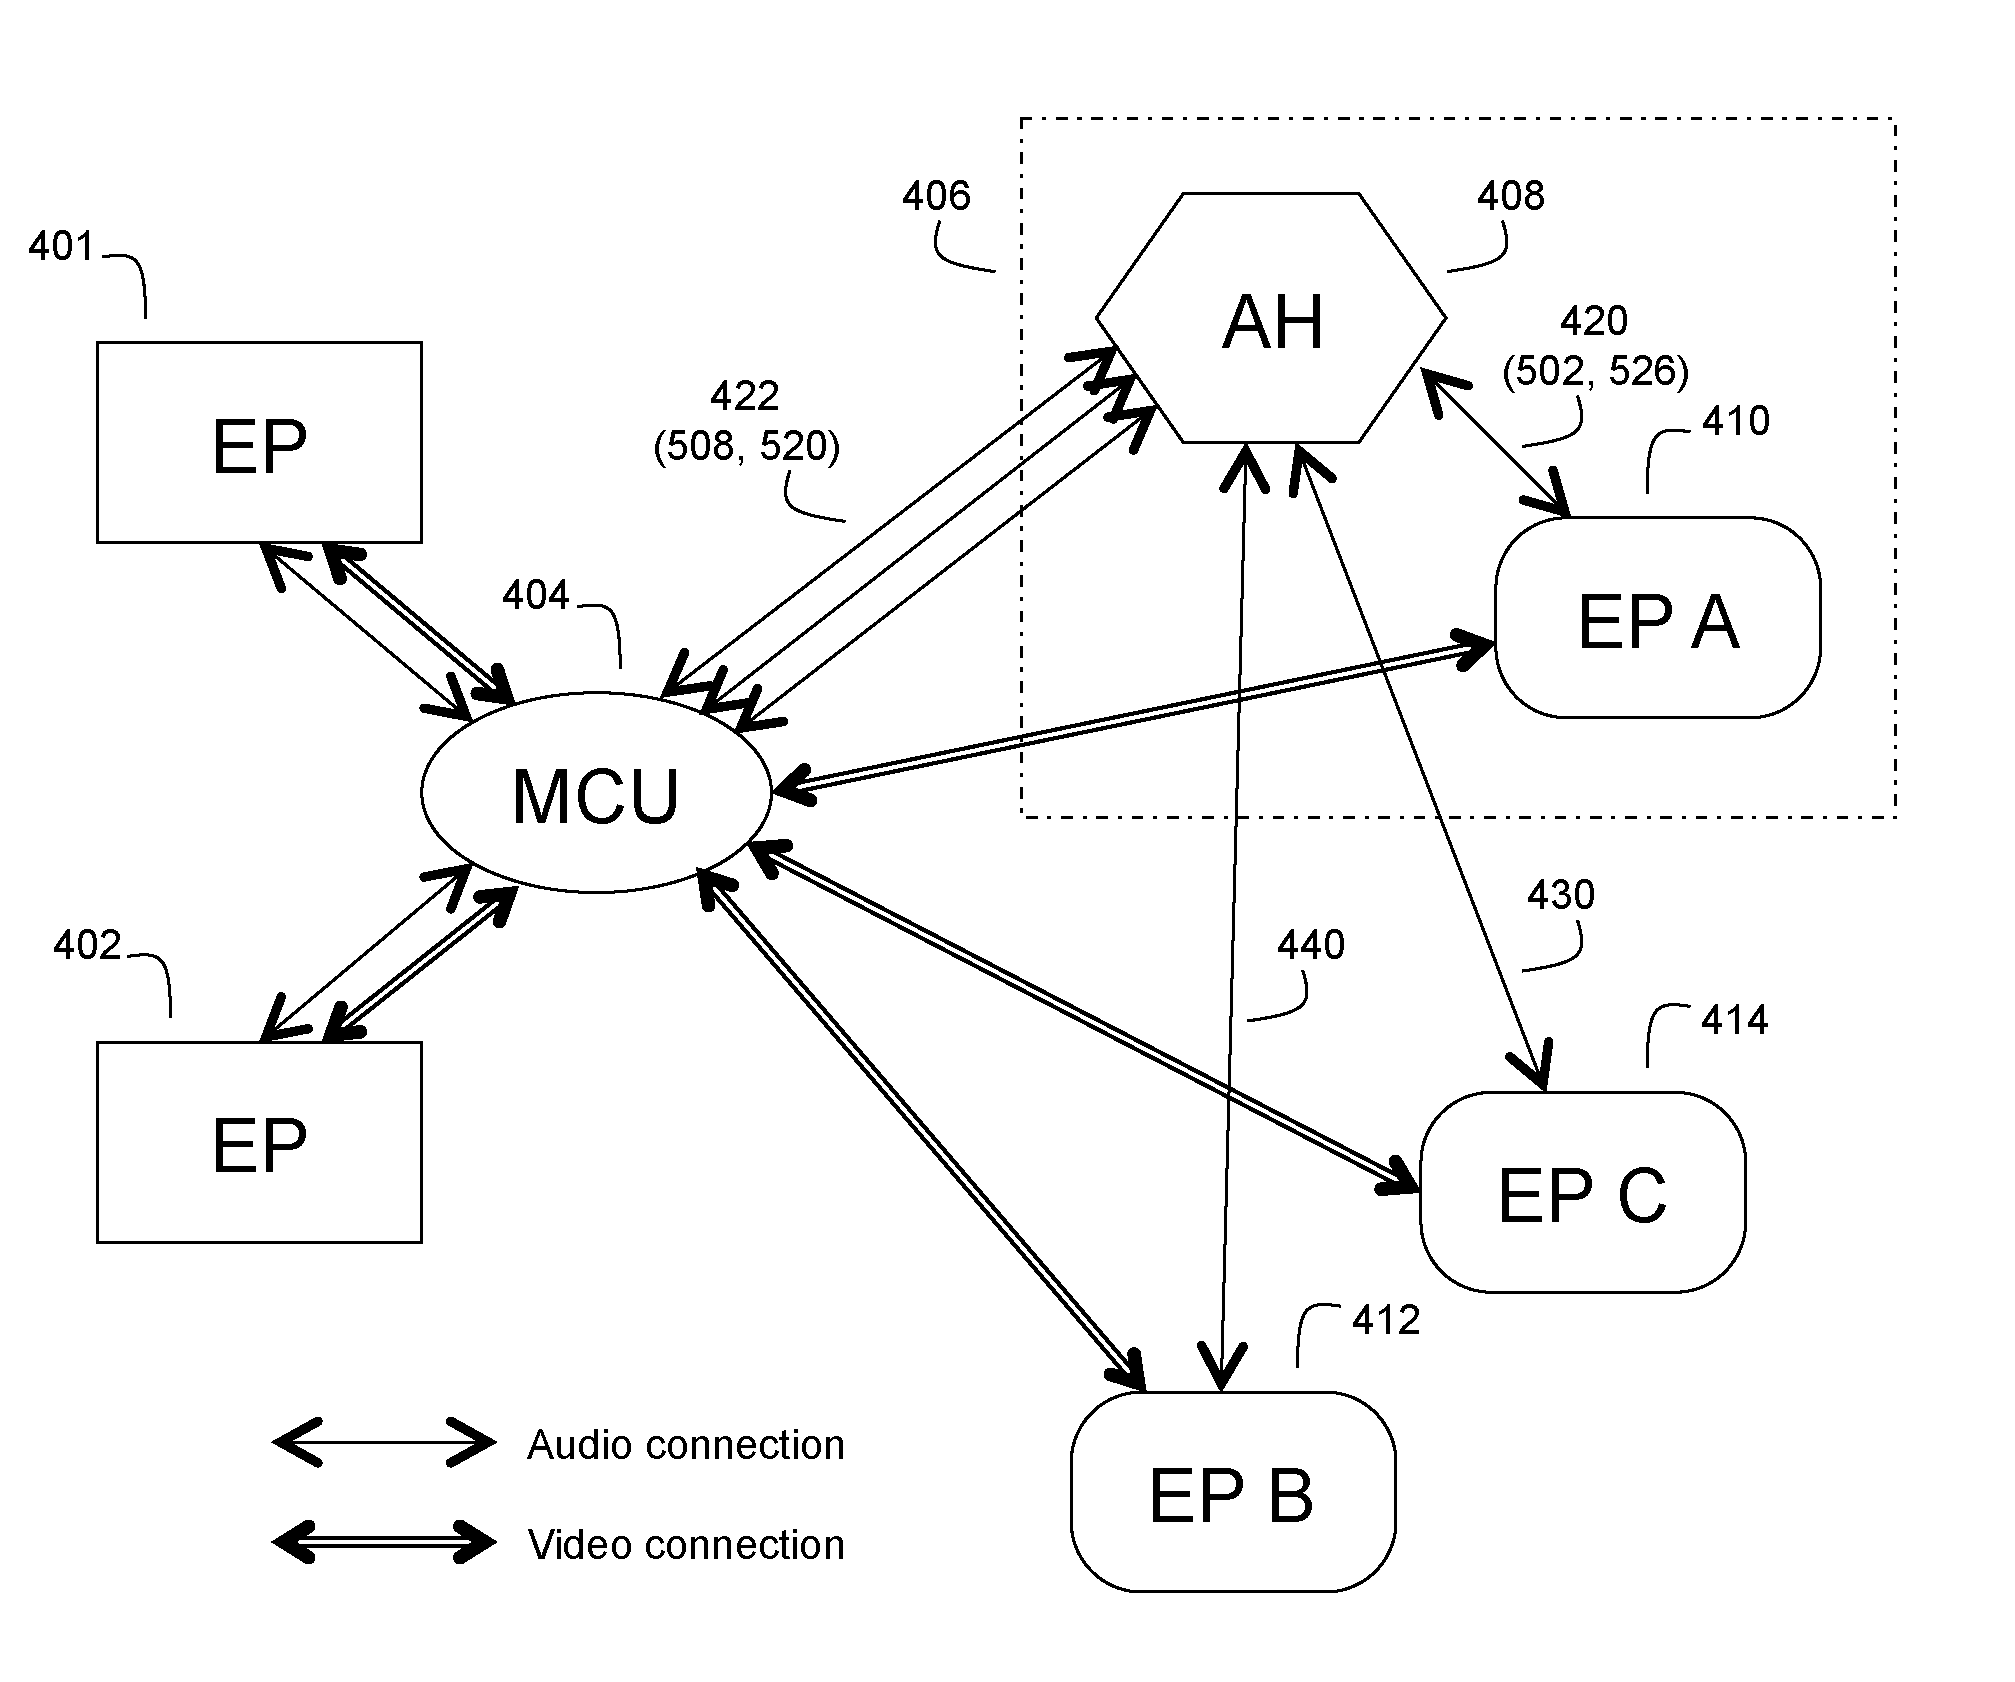 Method of Connecting Mesh-Topology Video Sessions to a Standard Video Conference Mixer